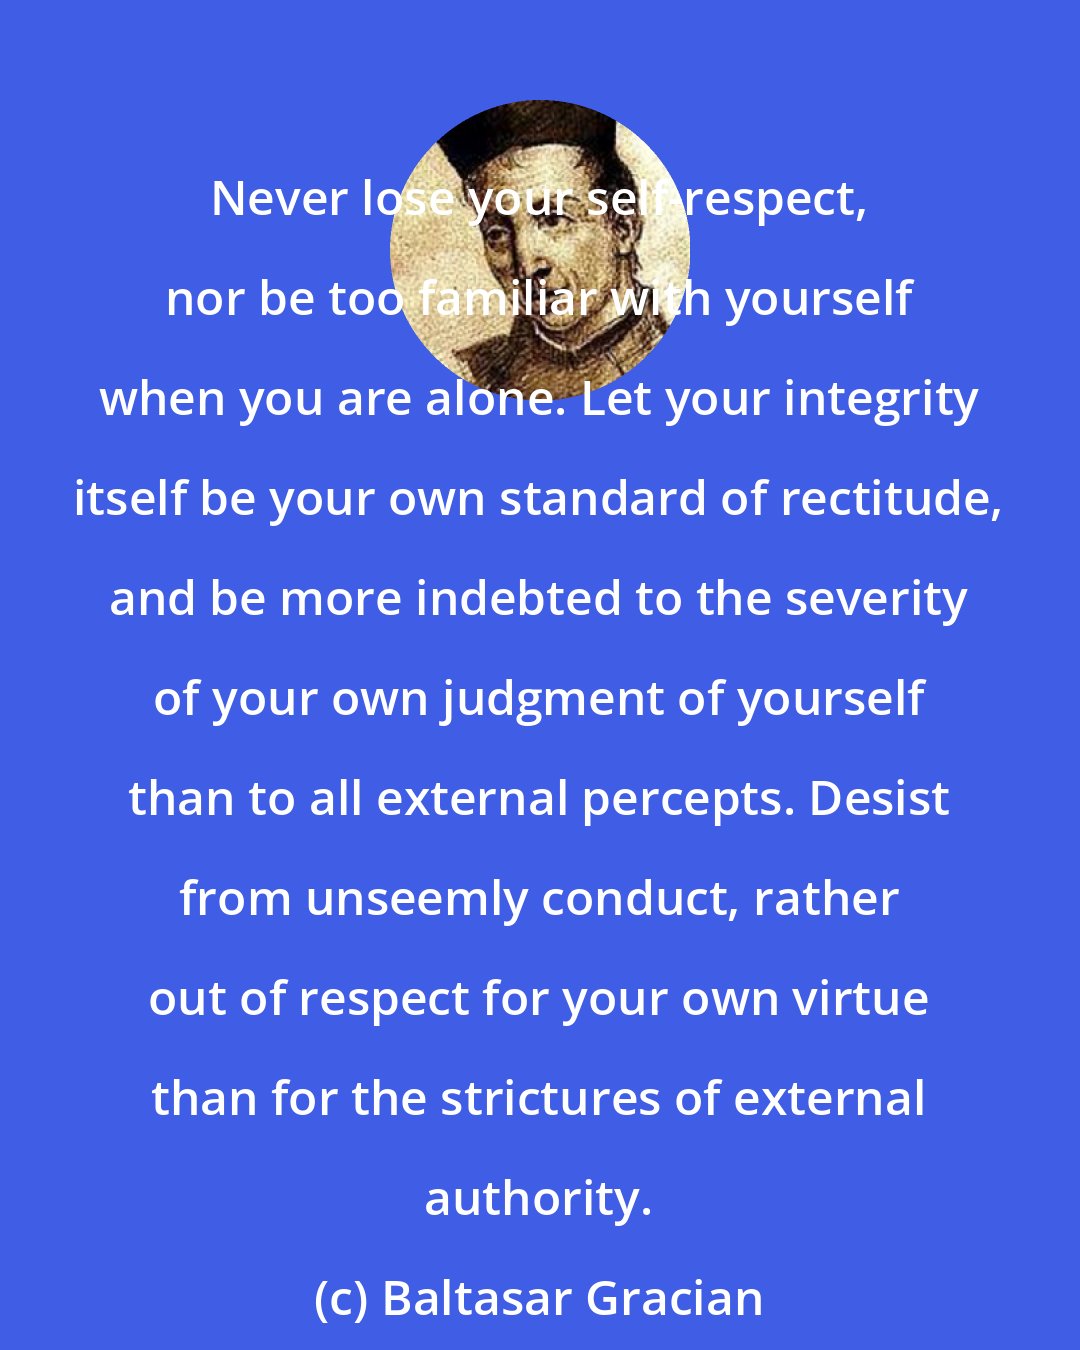 Baltasar Gracian: Never lose your self-respect, nor be too familiar with yourself when you are alone. Let your integrity itself be your own standard of rectitude, and be more indebted to the severity of your own judgment of yourself than to all external percepts. Desist from unseemly conduct, rather out of respect for your own virtue than for the strictures of external authority.